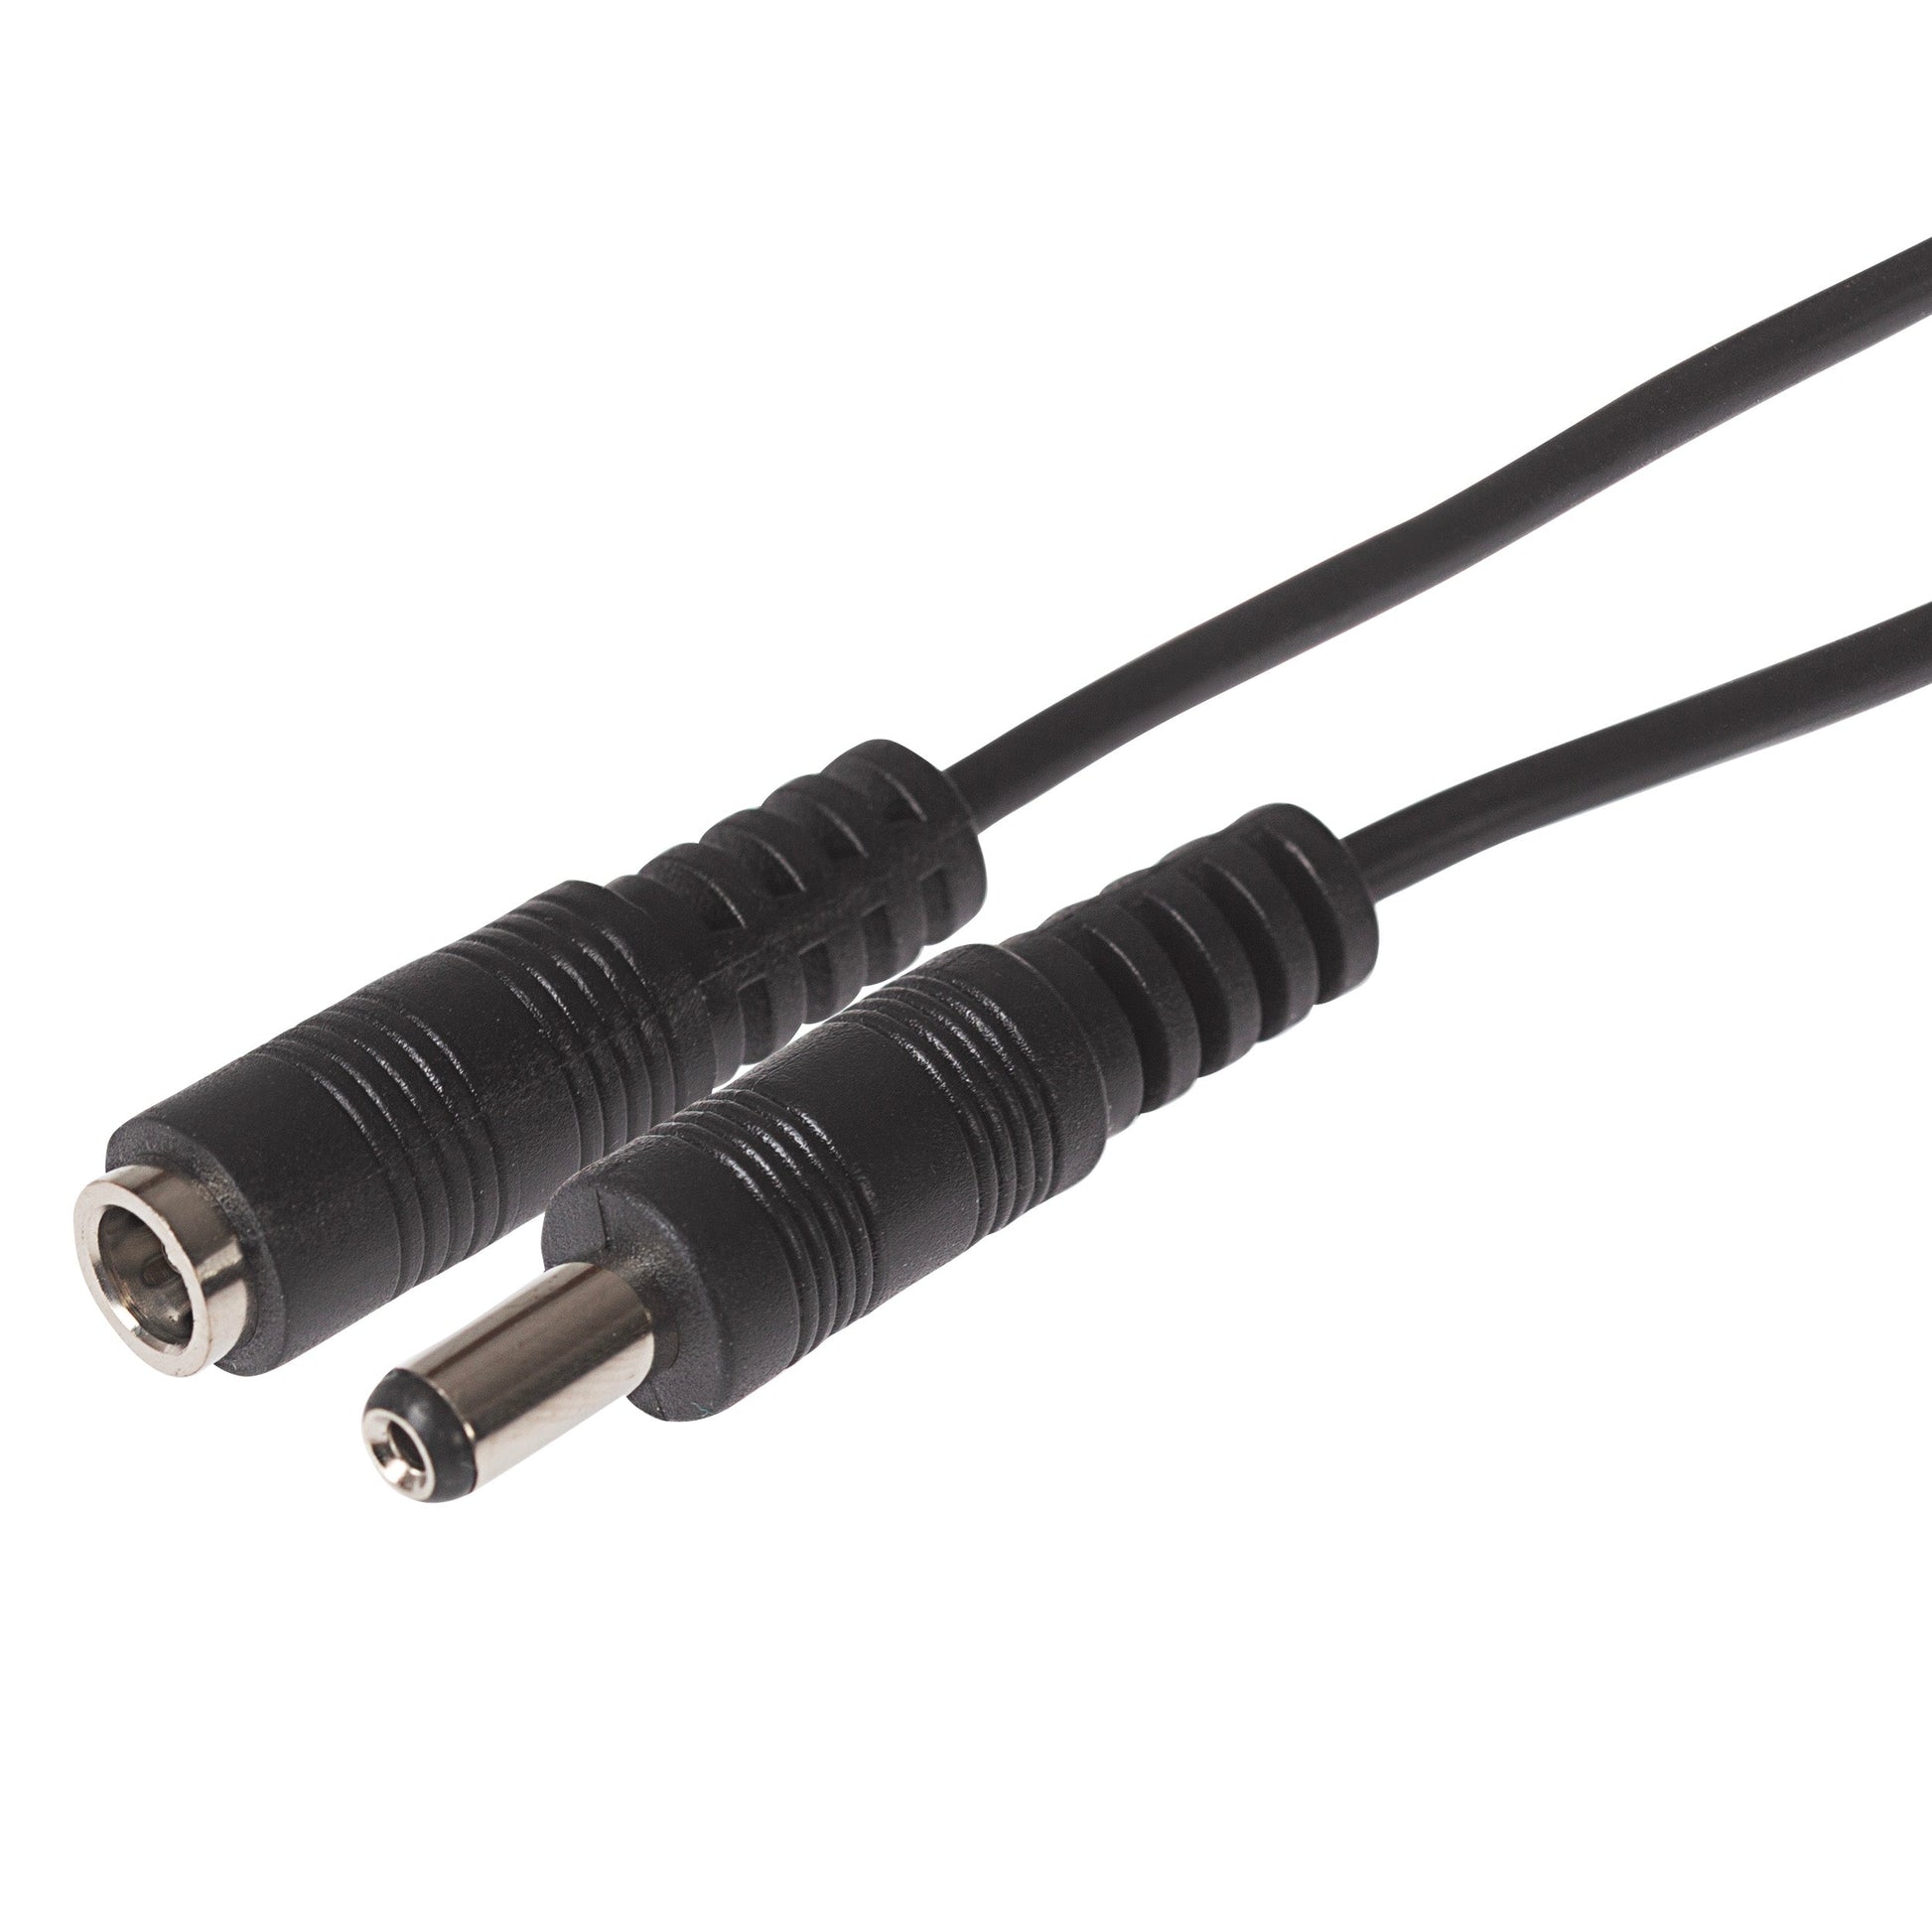 MPS Power Supply Extension Lead 2.1mm x 5.5mm Plug to 2.1mm x 5.5mm Socket - 5m Cable - maplin.co.uk